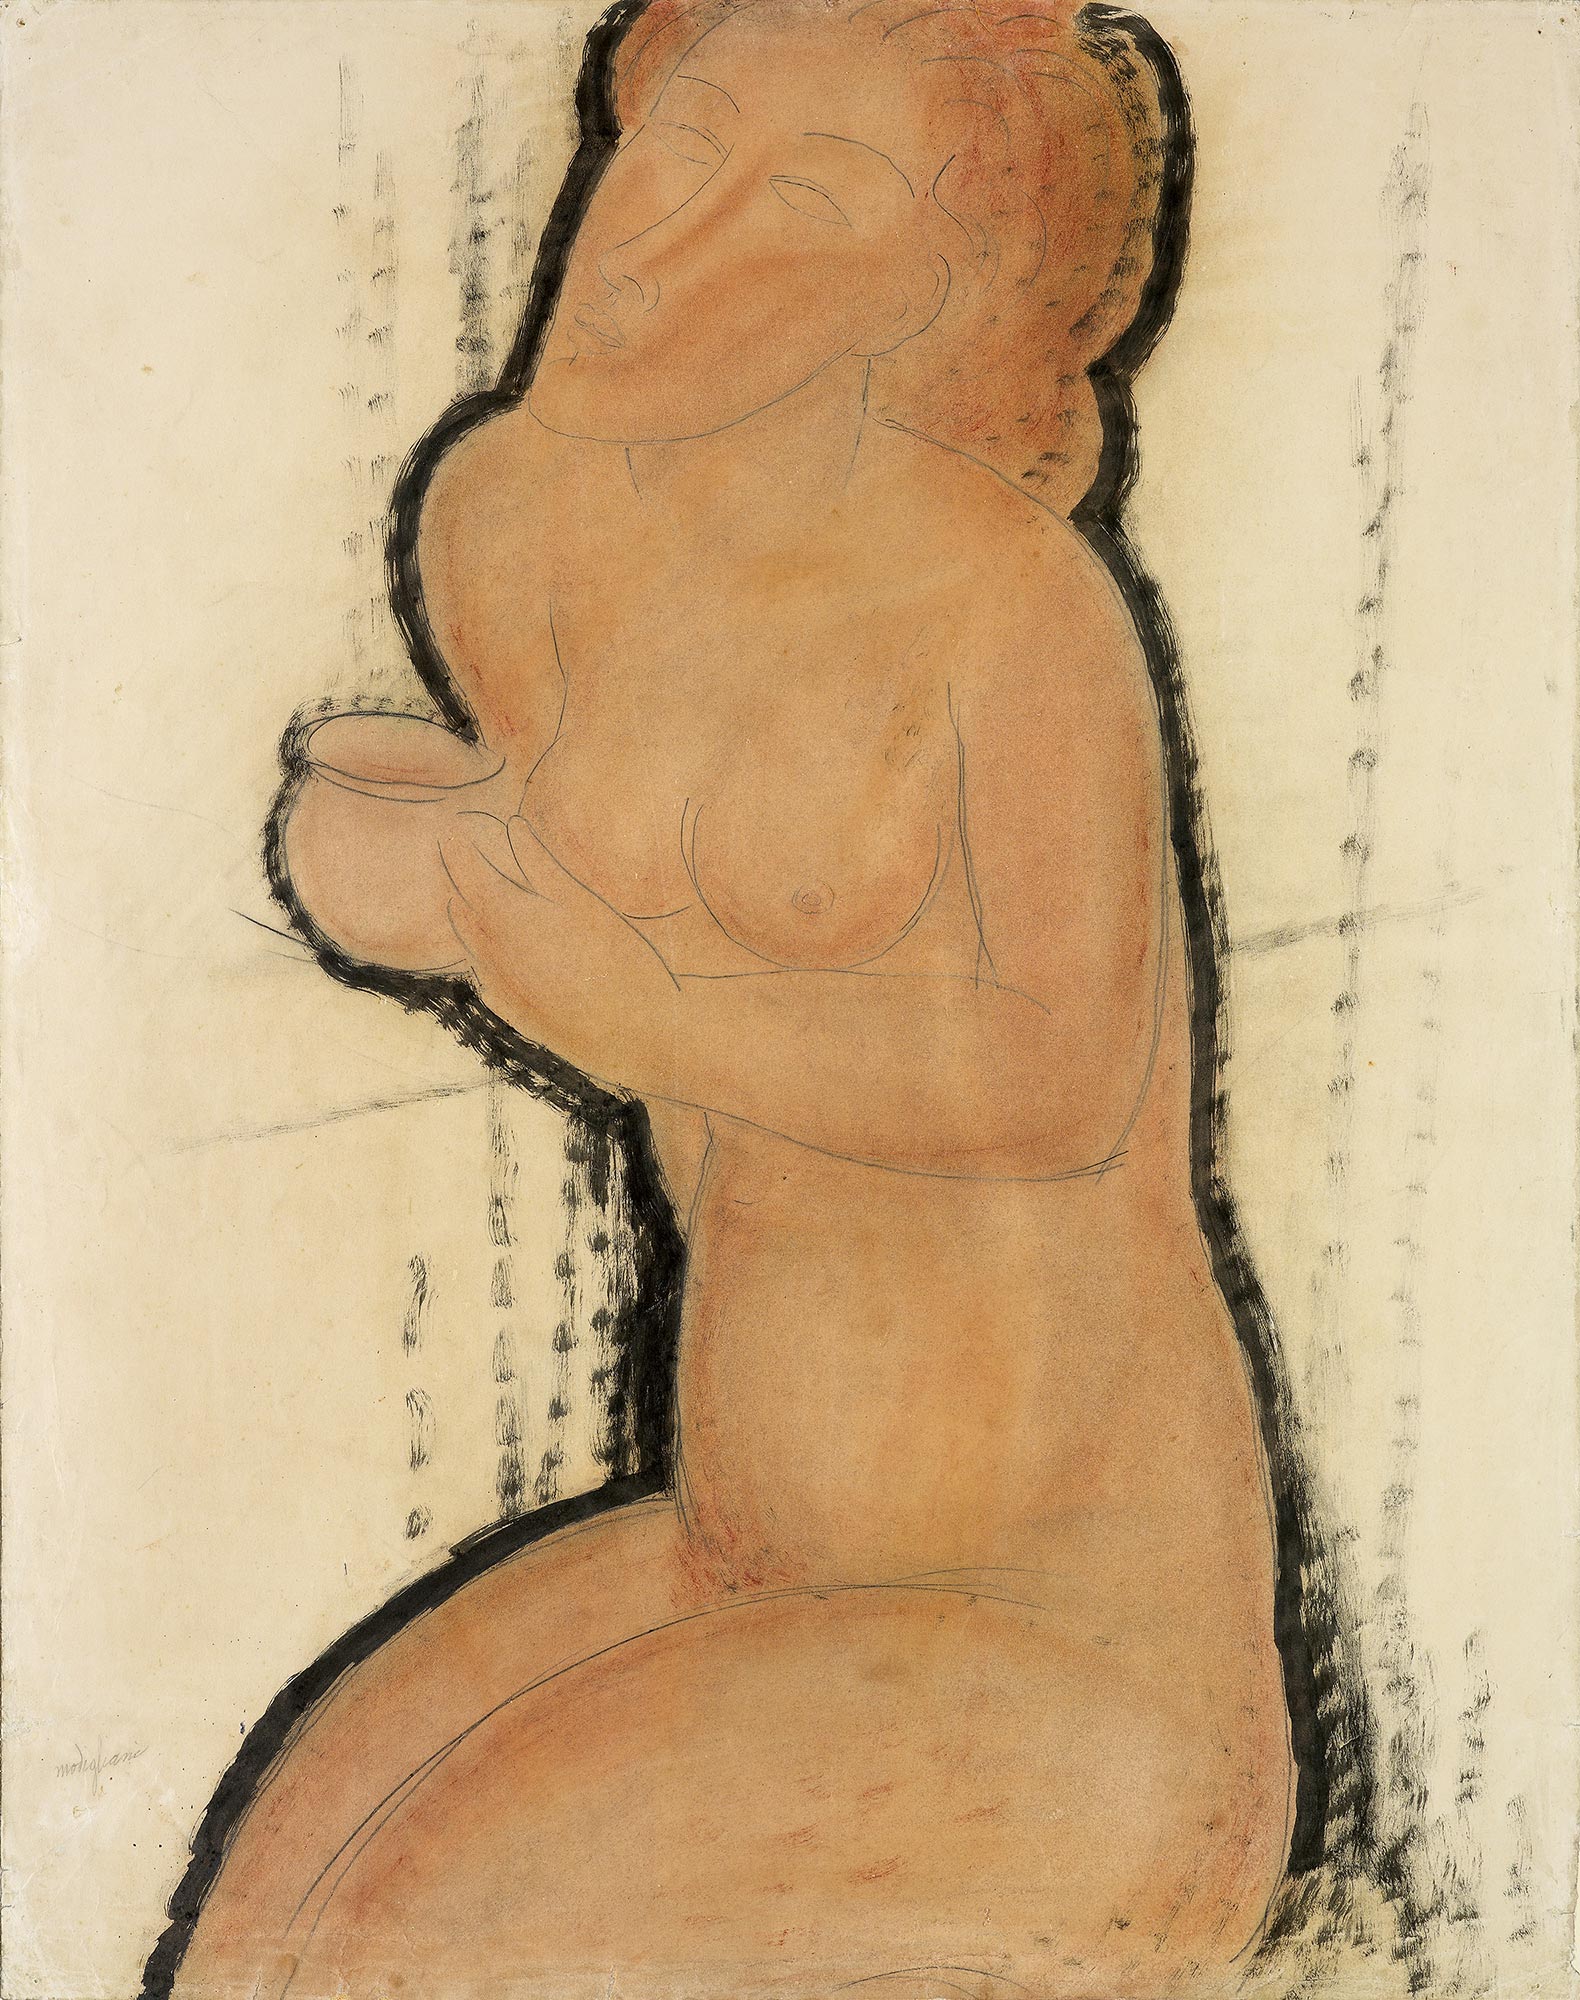 Amedeo Modigliani, Nude with Cup, c.1918